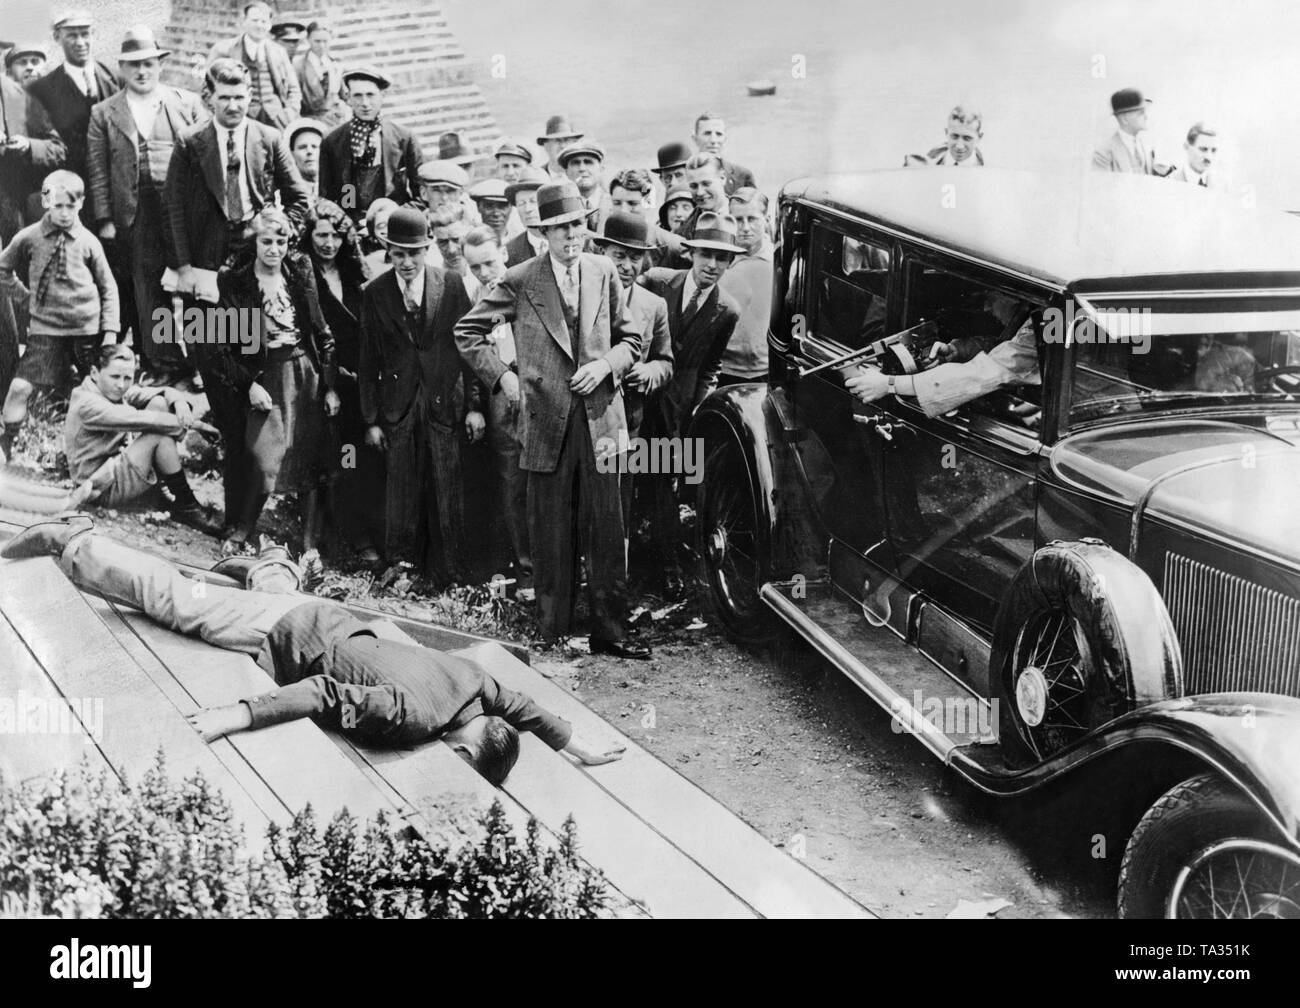 The police presents the Cadillac 341 Town Sedan of the American crime boss Al Capone in London. The Cadillac is one of the first armored cars, Capone had it equipped with bullet-proof glass and reinforced doors. Stock Photo